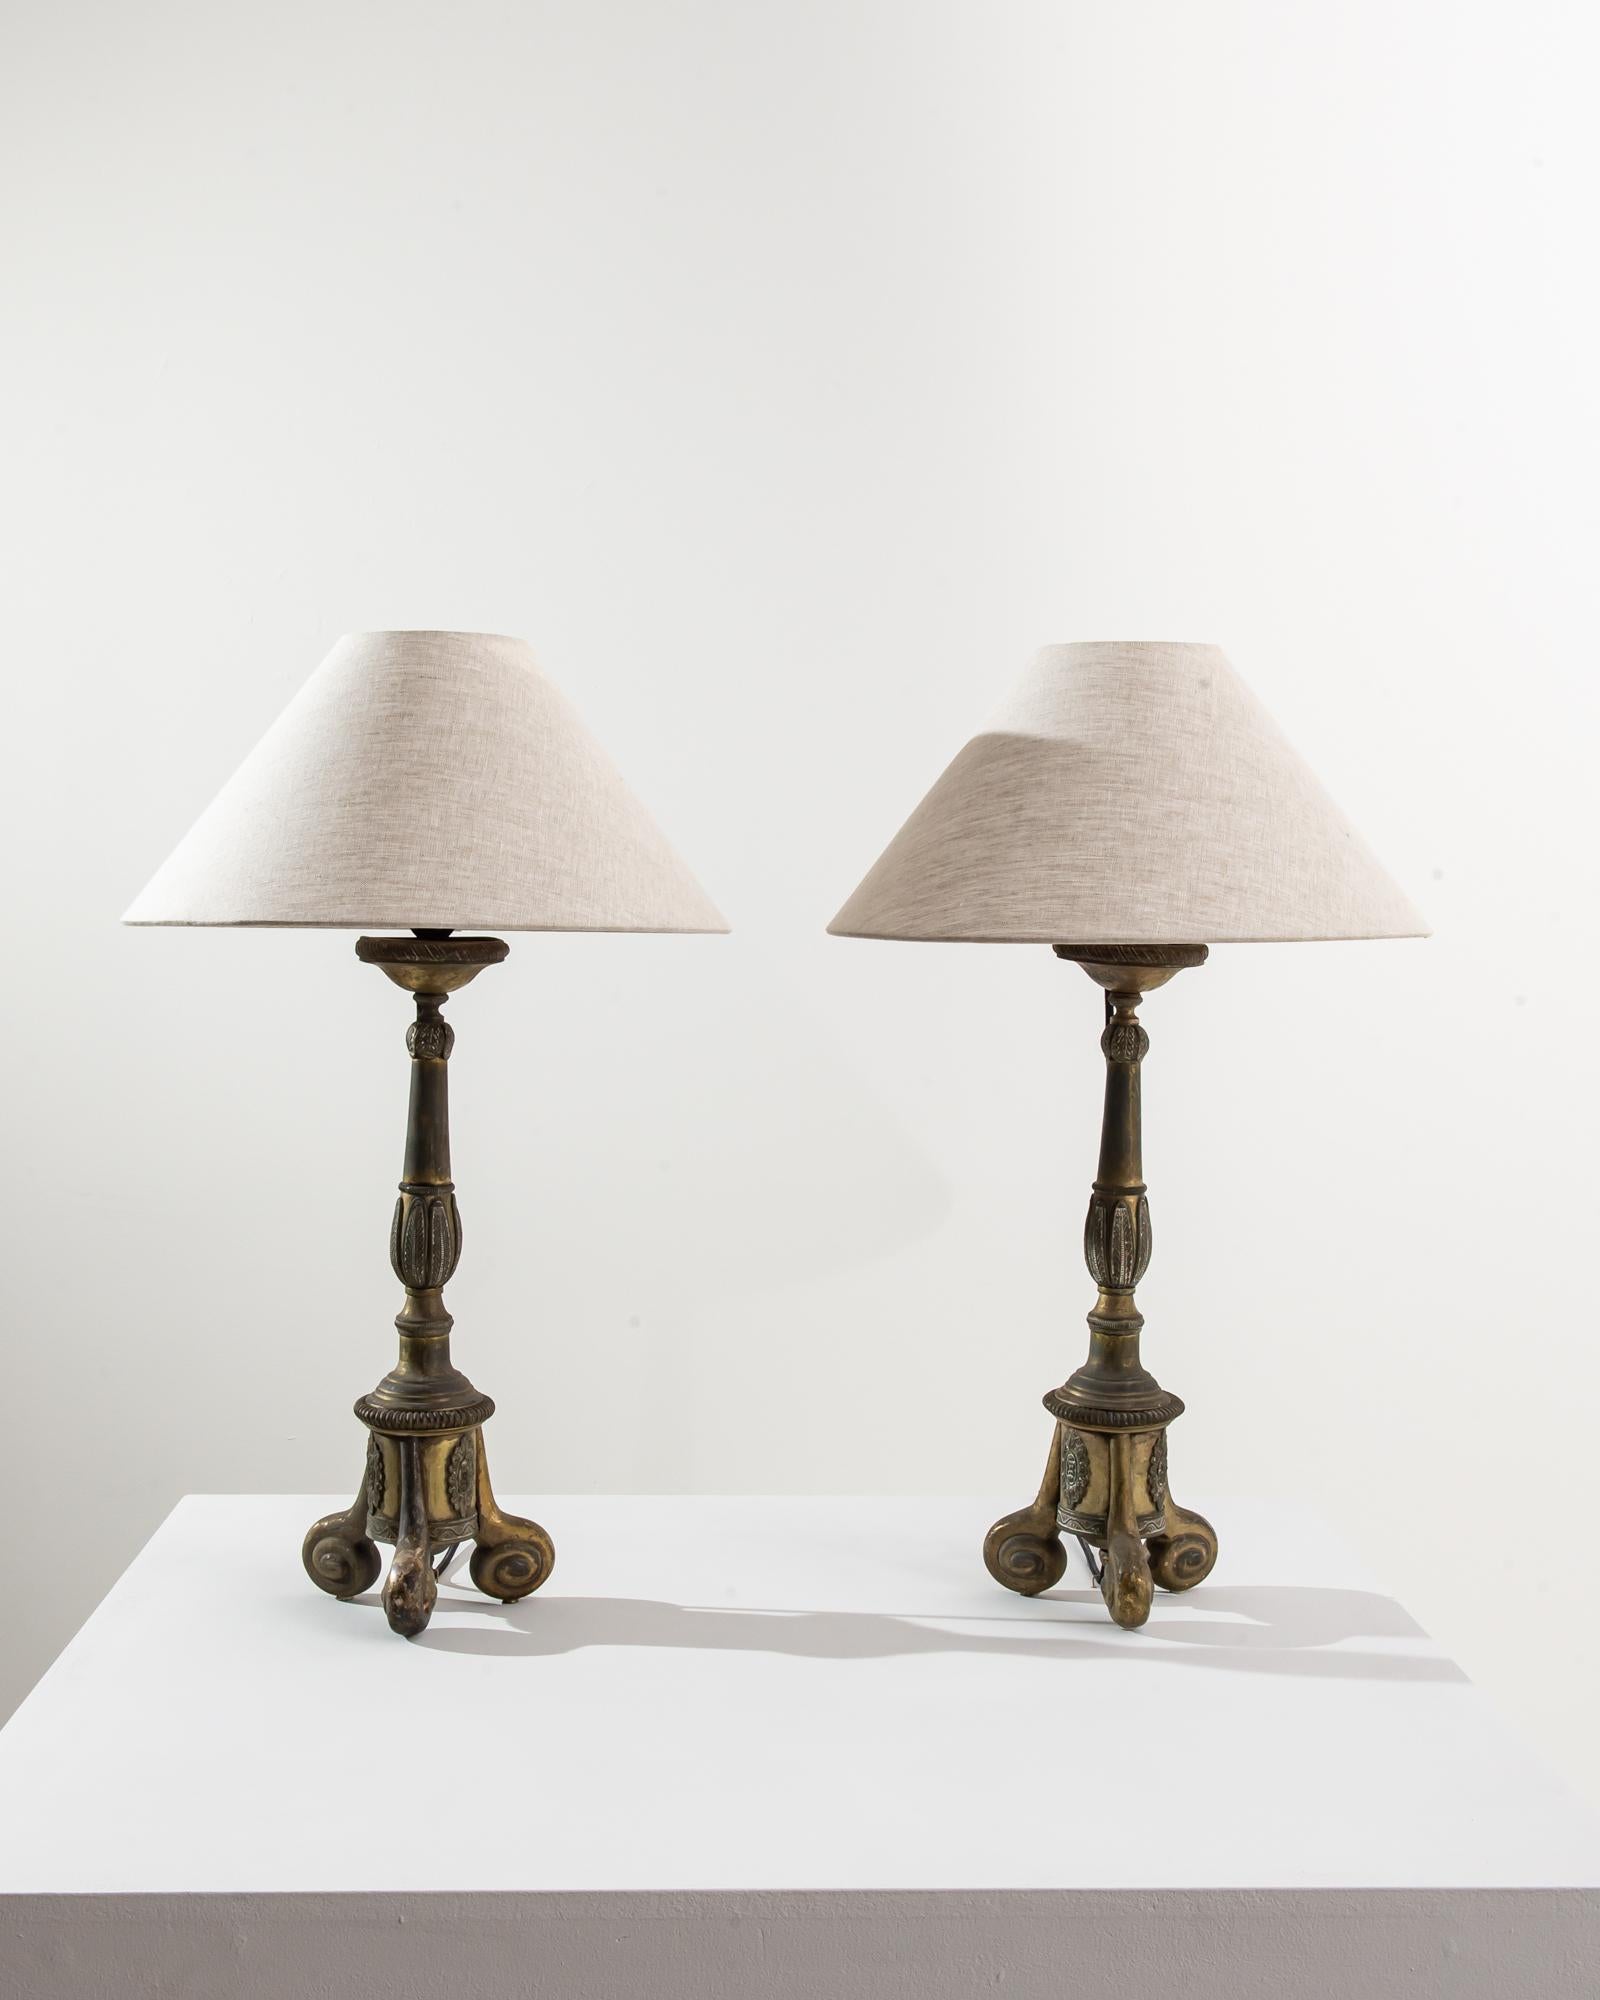 A pair of 19th century metal table lamps produced in France, standing on small shell tripod feet. The ornate shaft is adorned with daintily carved indents and leaves, completed by an intricate floral gadroon and frieze at its base. Lending a soft